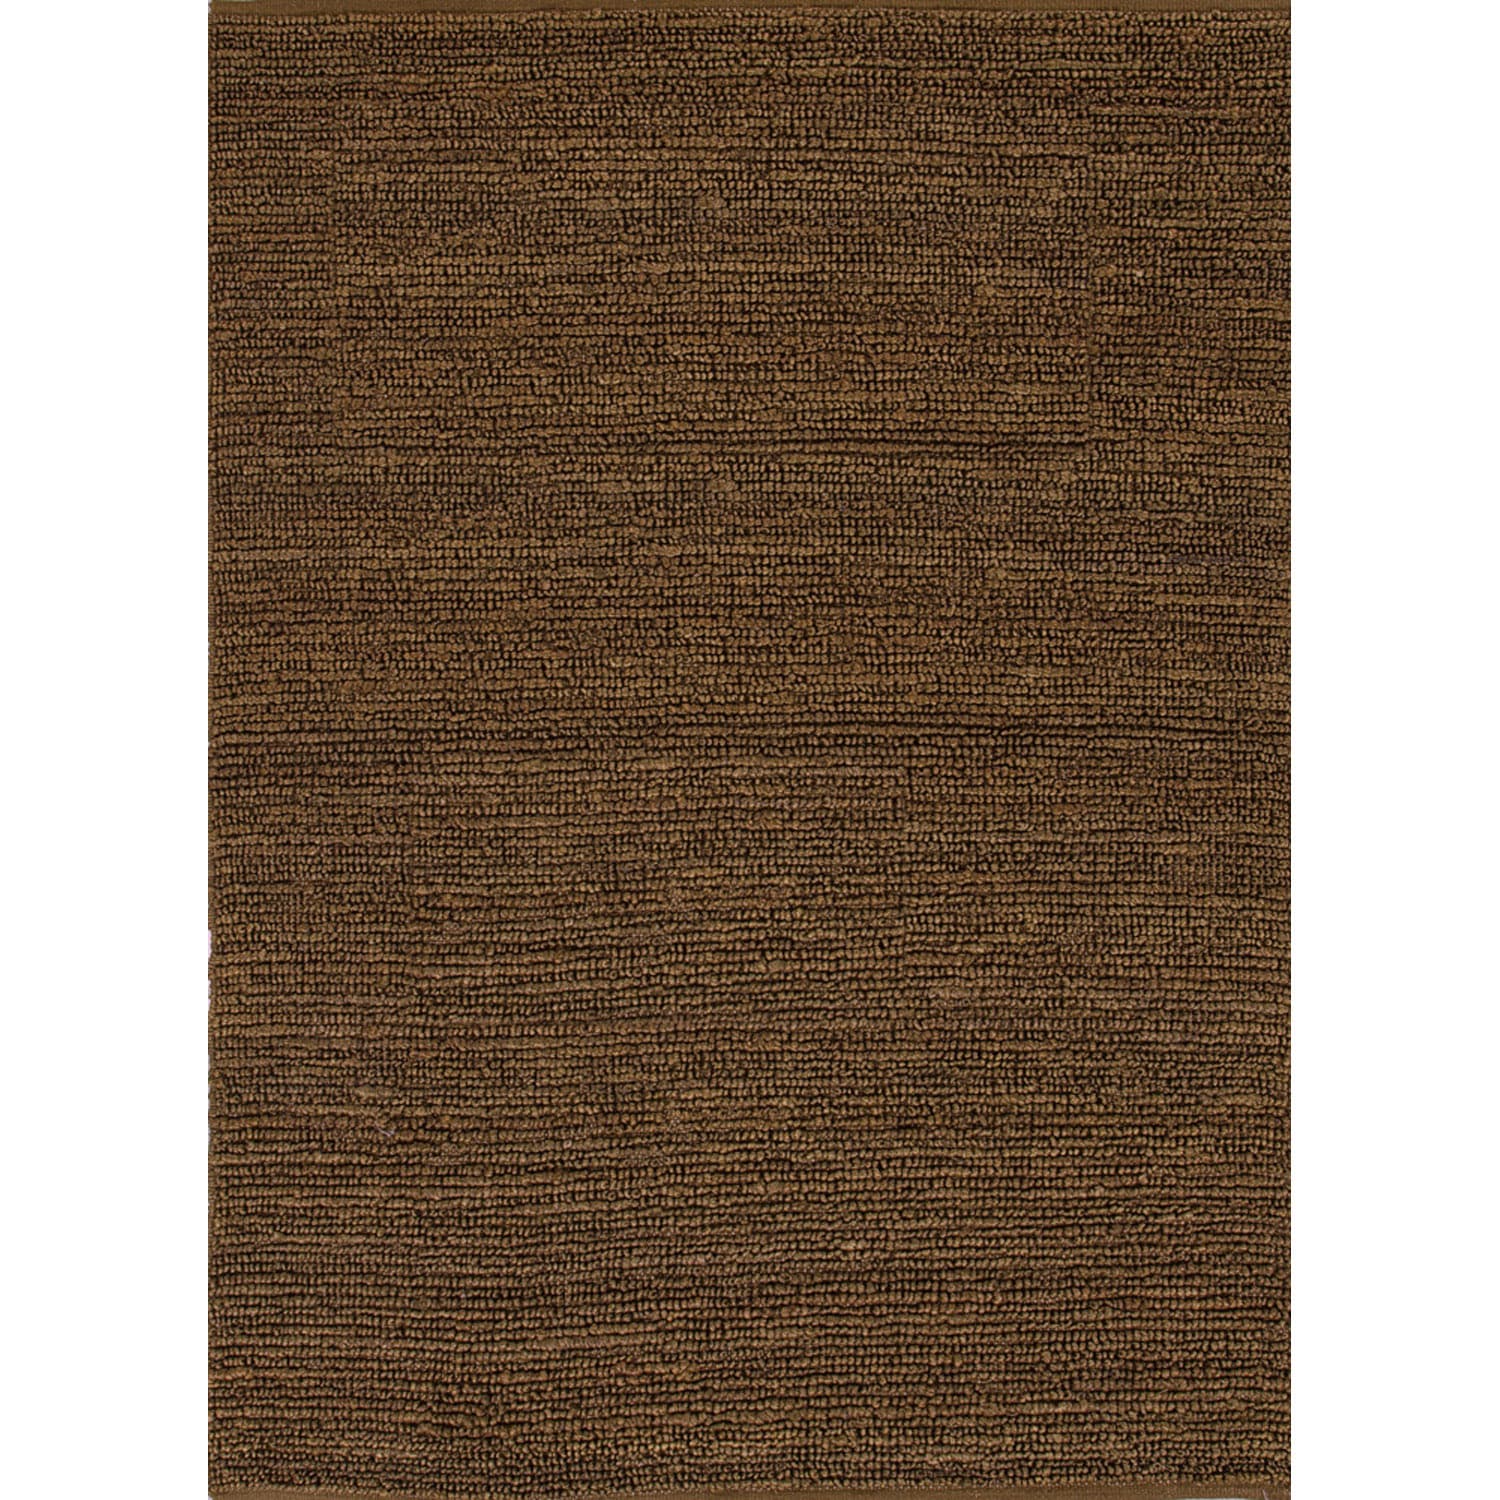 Hand woven Naturals Solid Pattern Brown Rug (2 X 3)